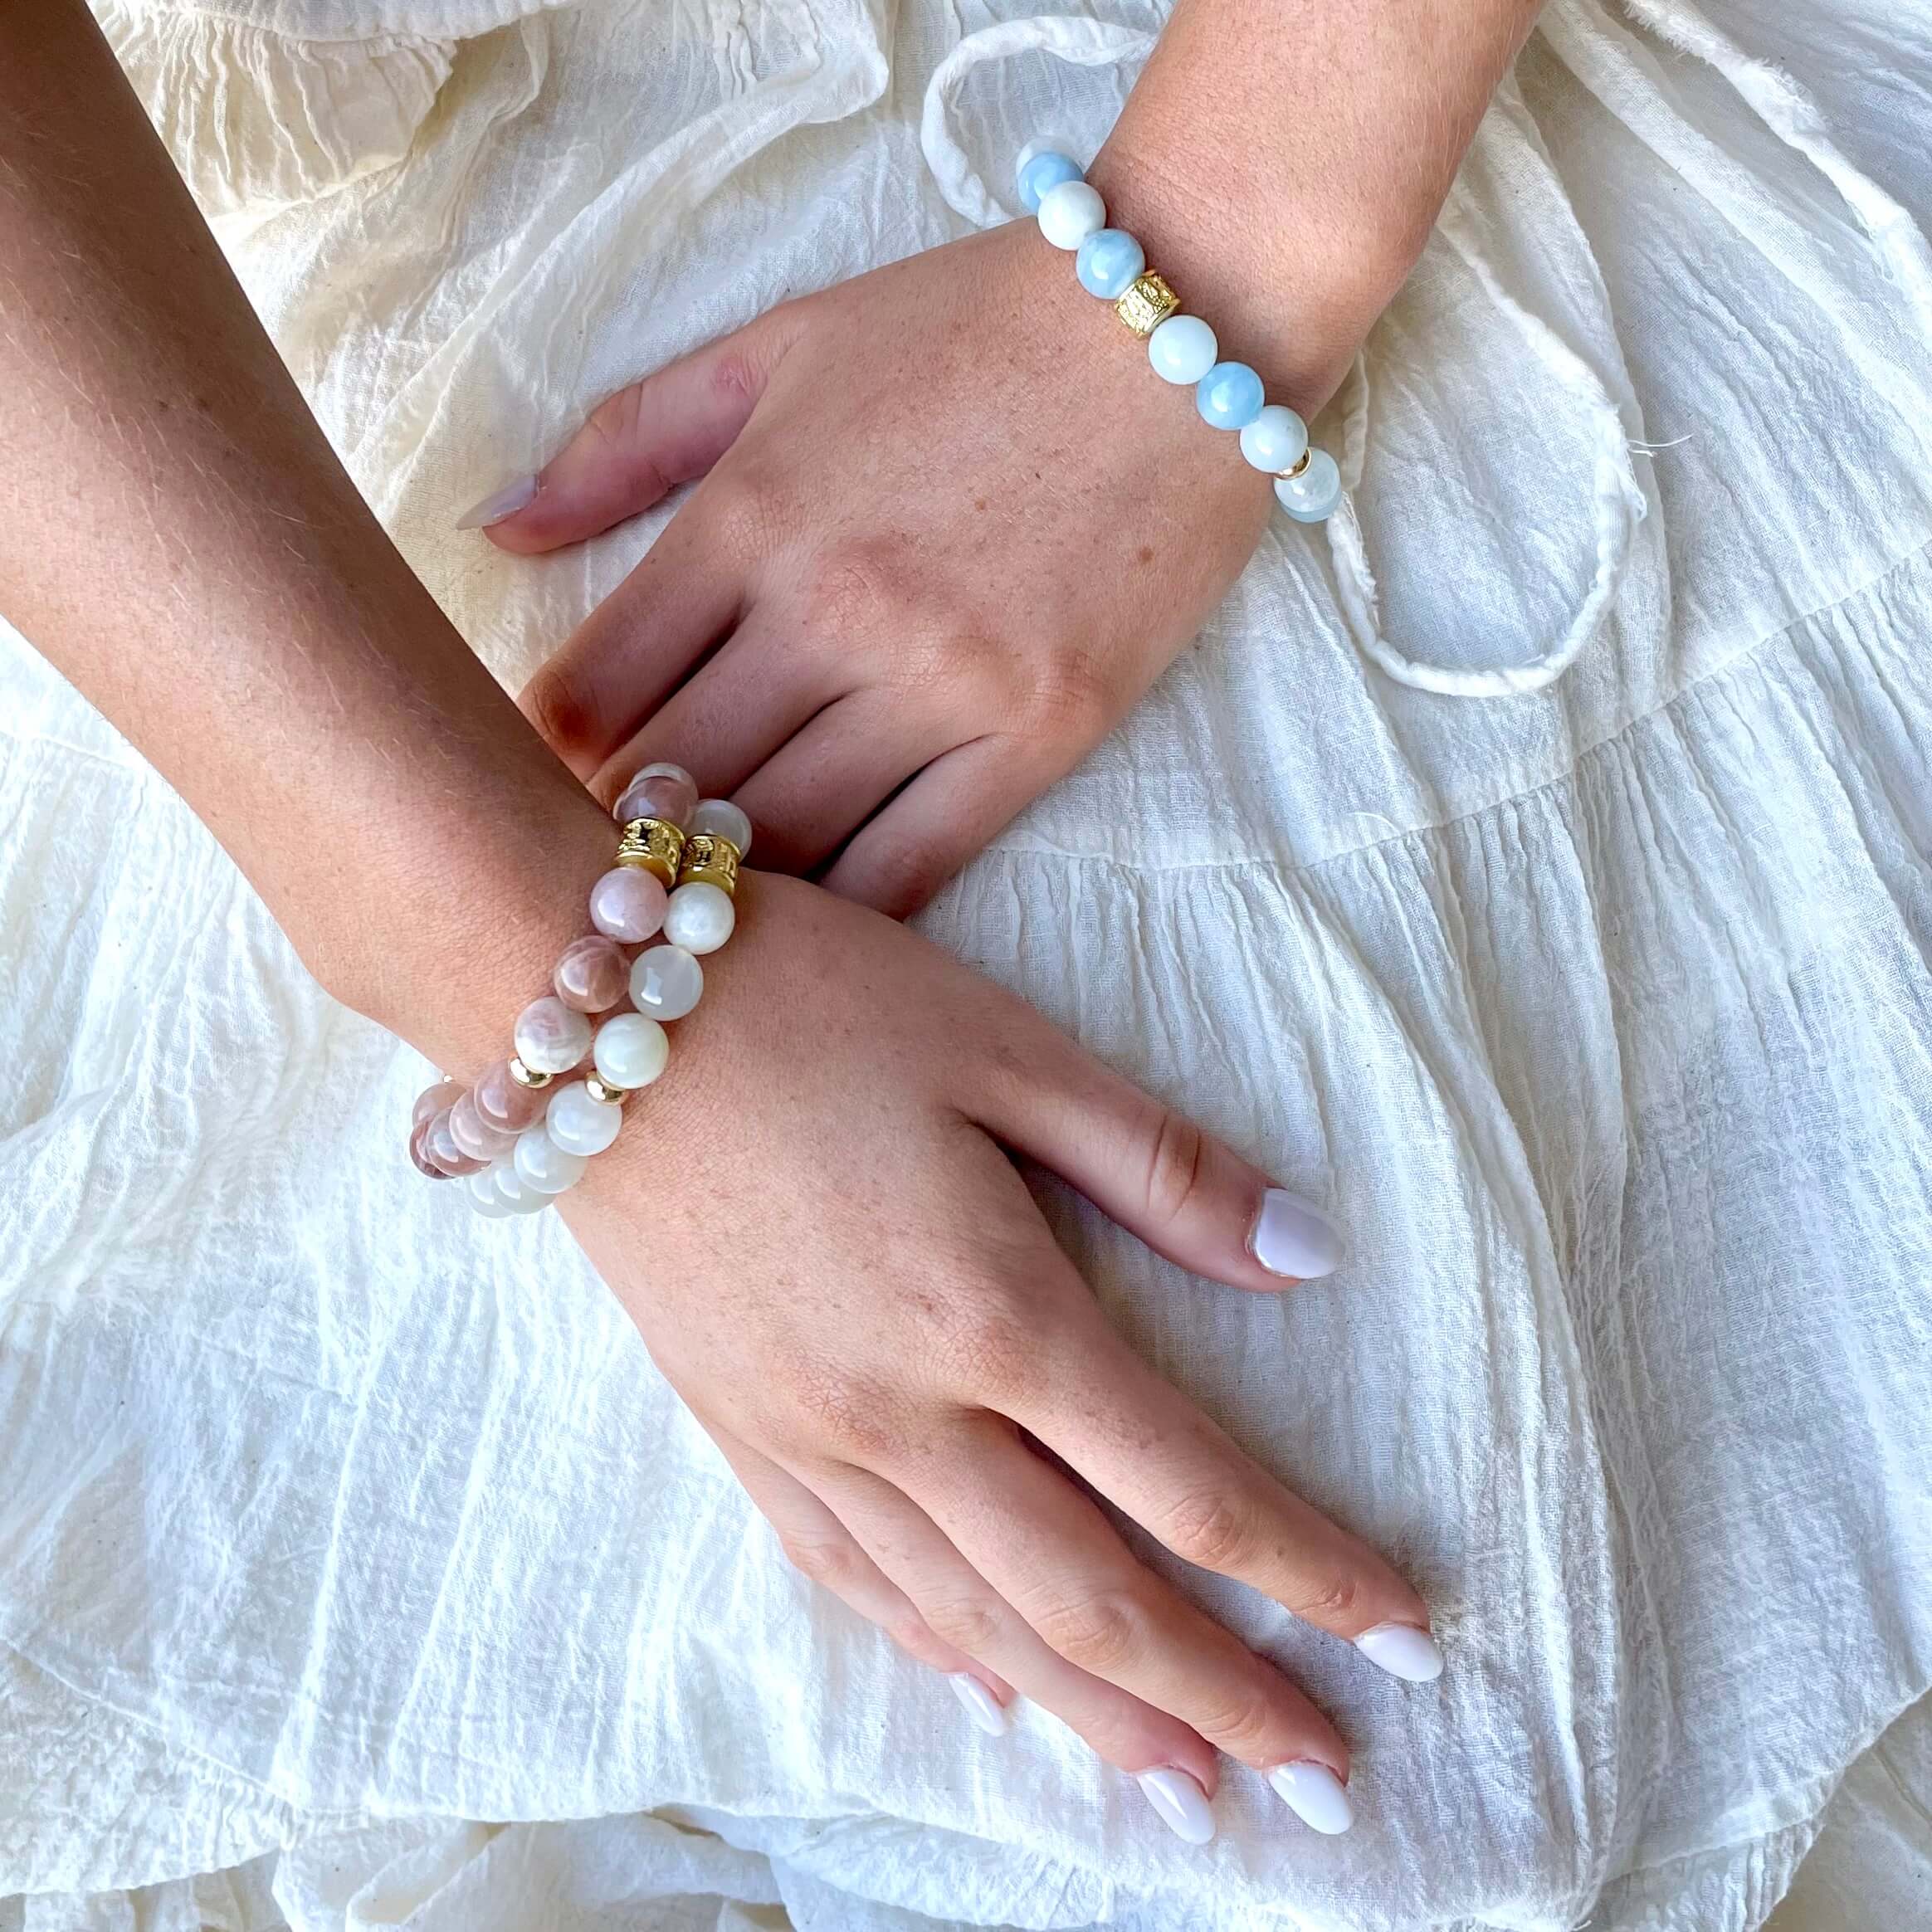 WHITE MOONSTONE & GOLD BEADED BRACELET - HALCYON COLLECTION - Headless Nation